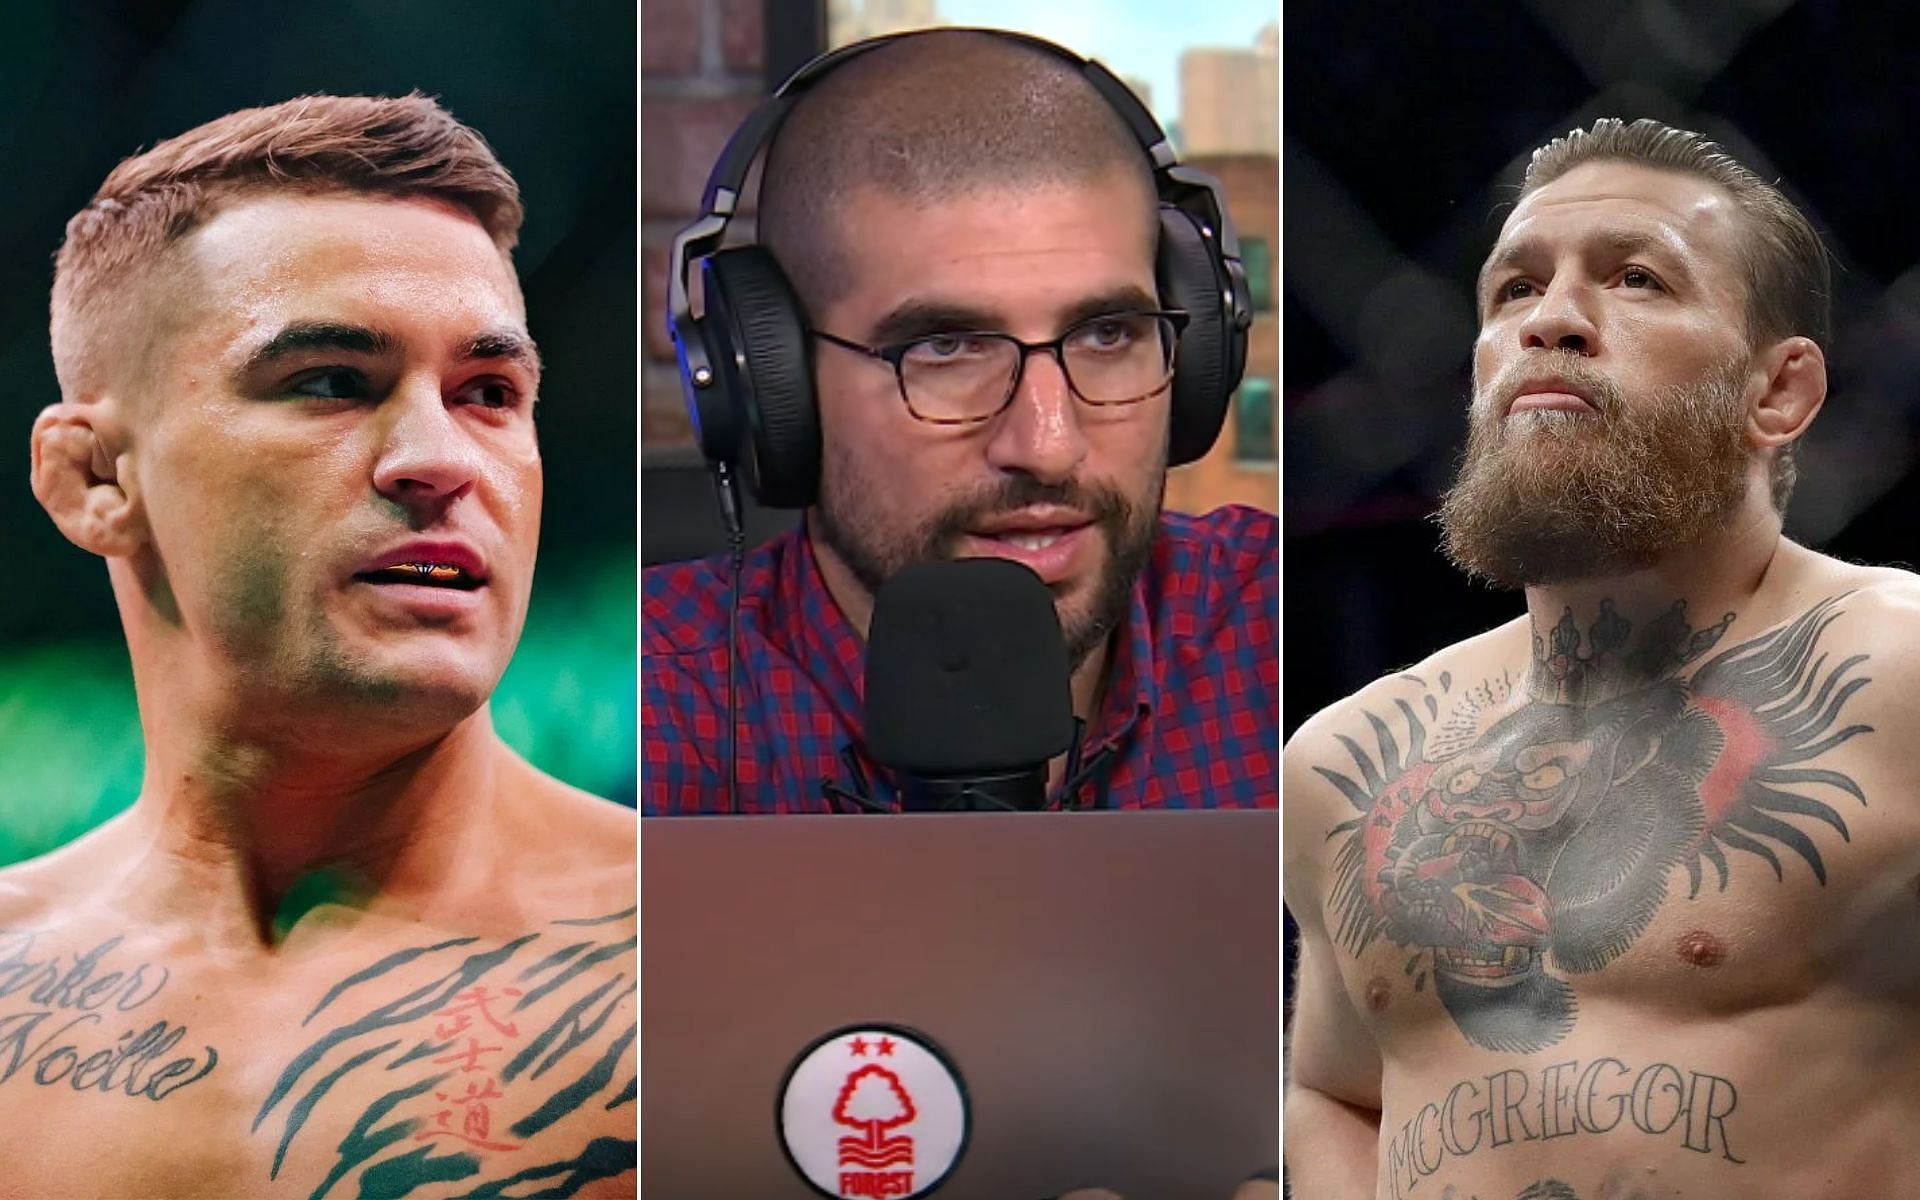 Dustin Poirier [Left], Ariel Helwani [Middle], and Conor McGregor [Right] [Photo credit: MMAFightingonSBN - YouTube]